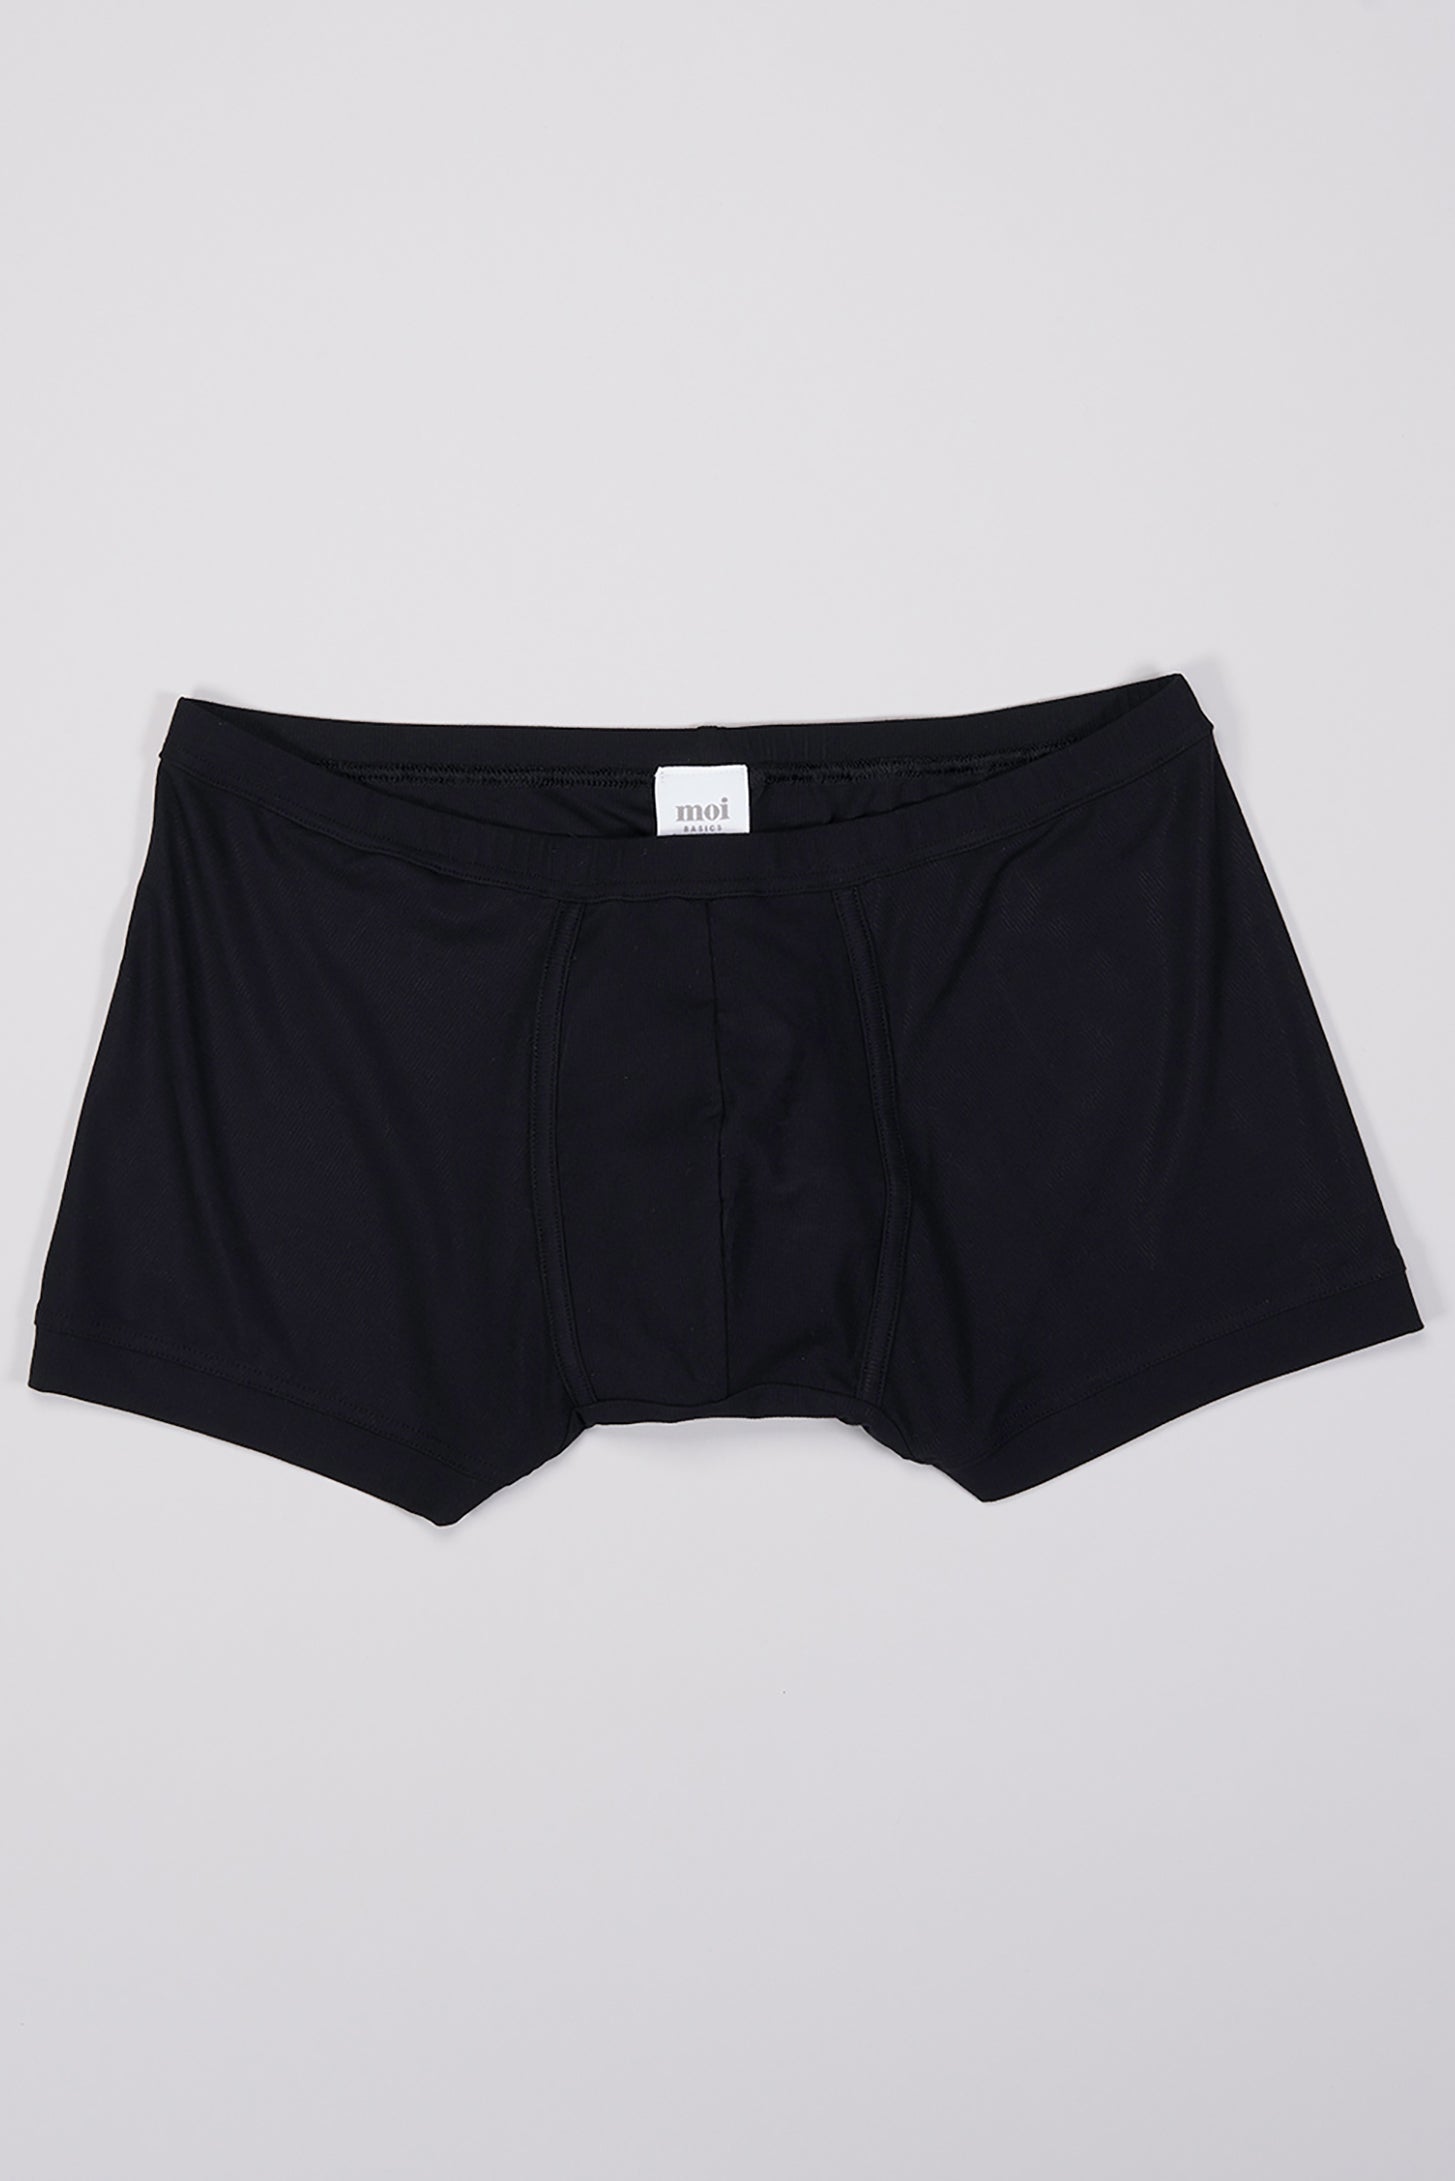 Boxer briefs / underpants in black made from natural MicroModal